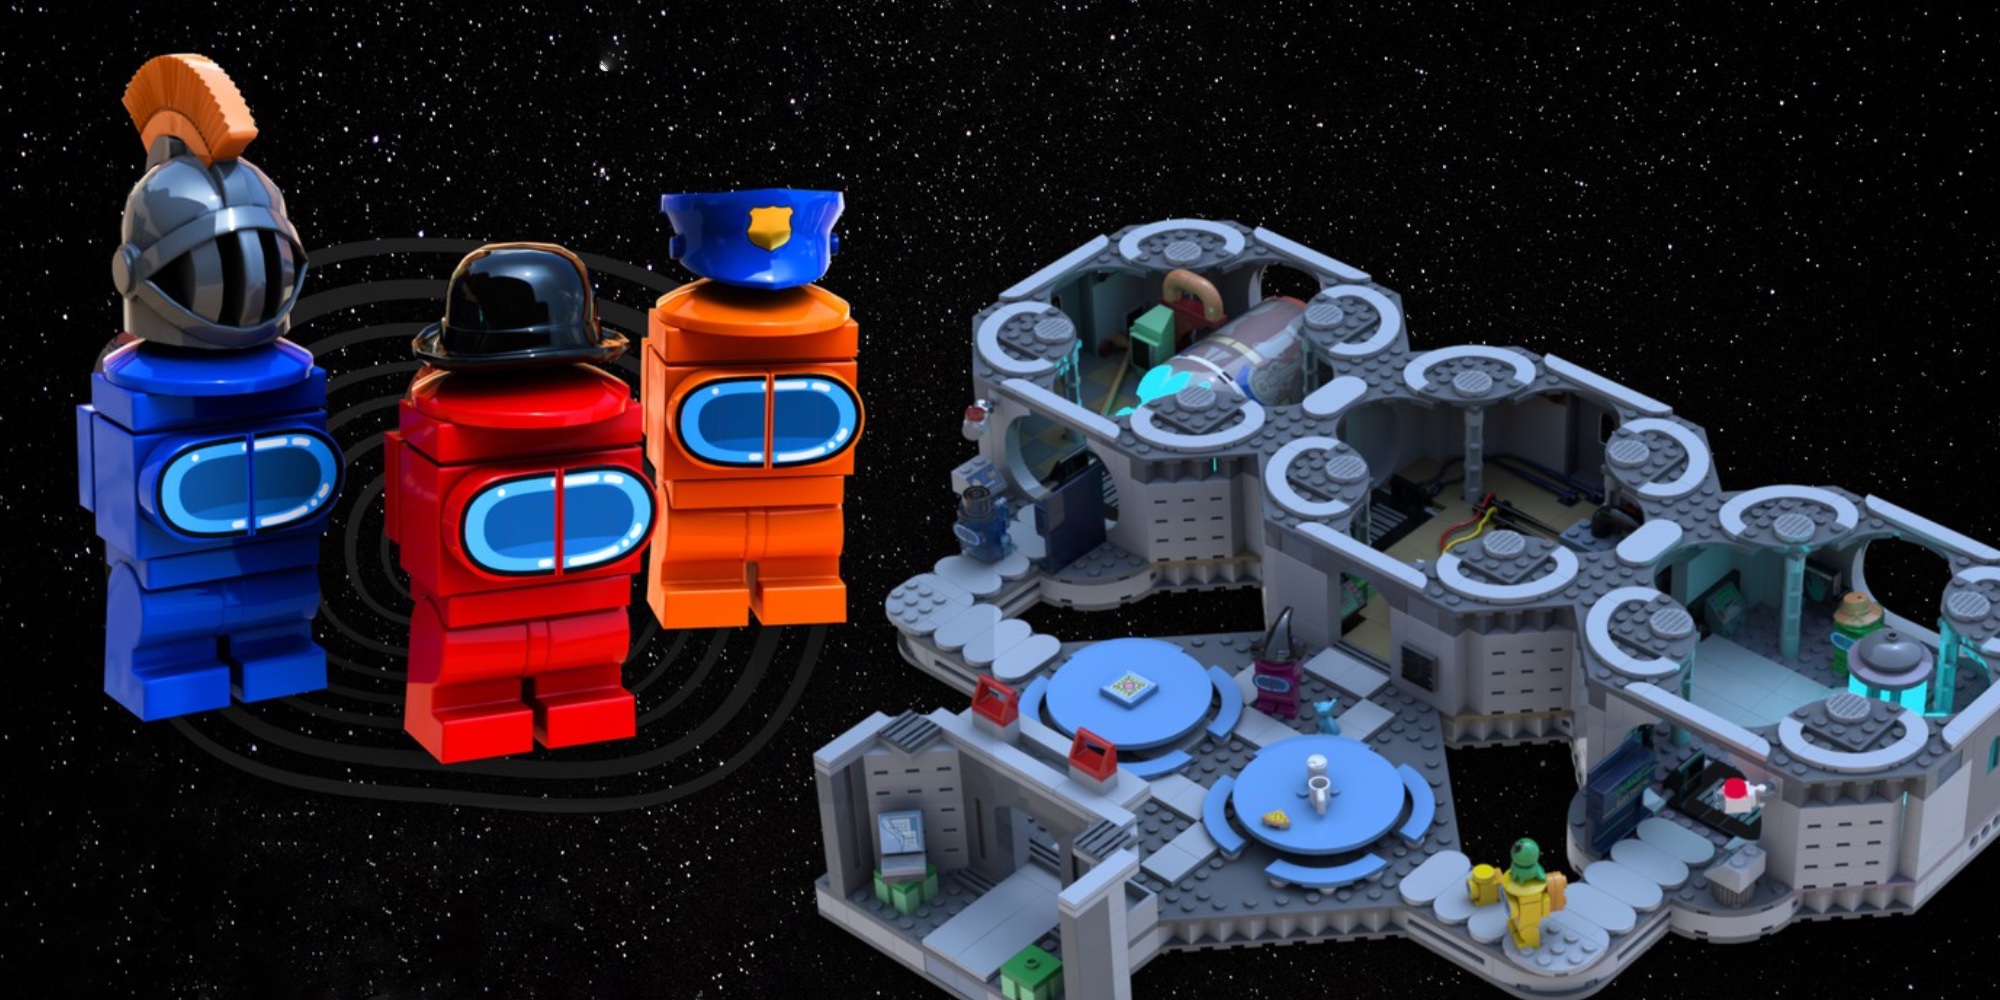 LEGO Among Us highlights October's best Ideas projects - 9to5Toys